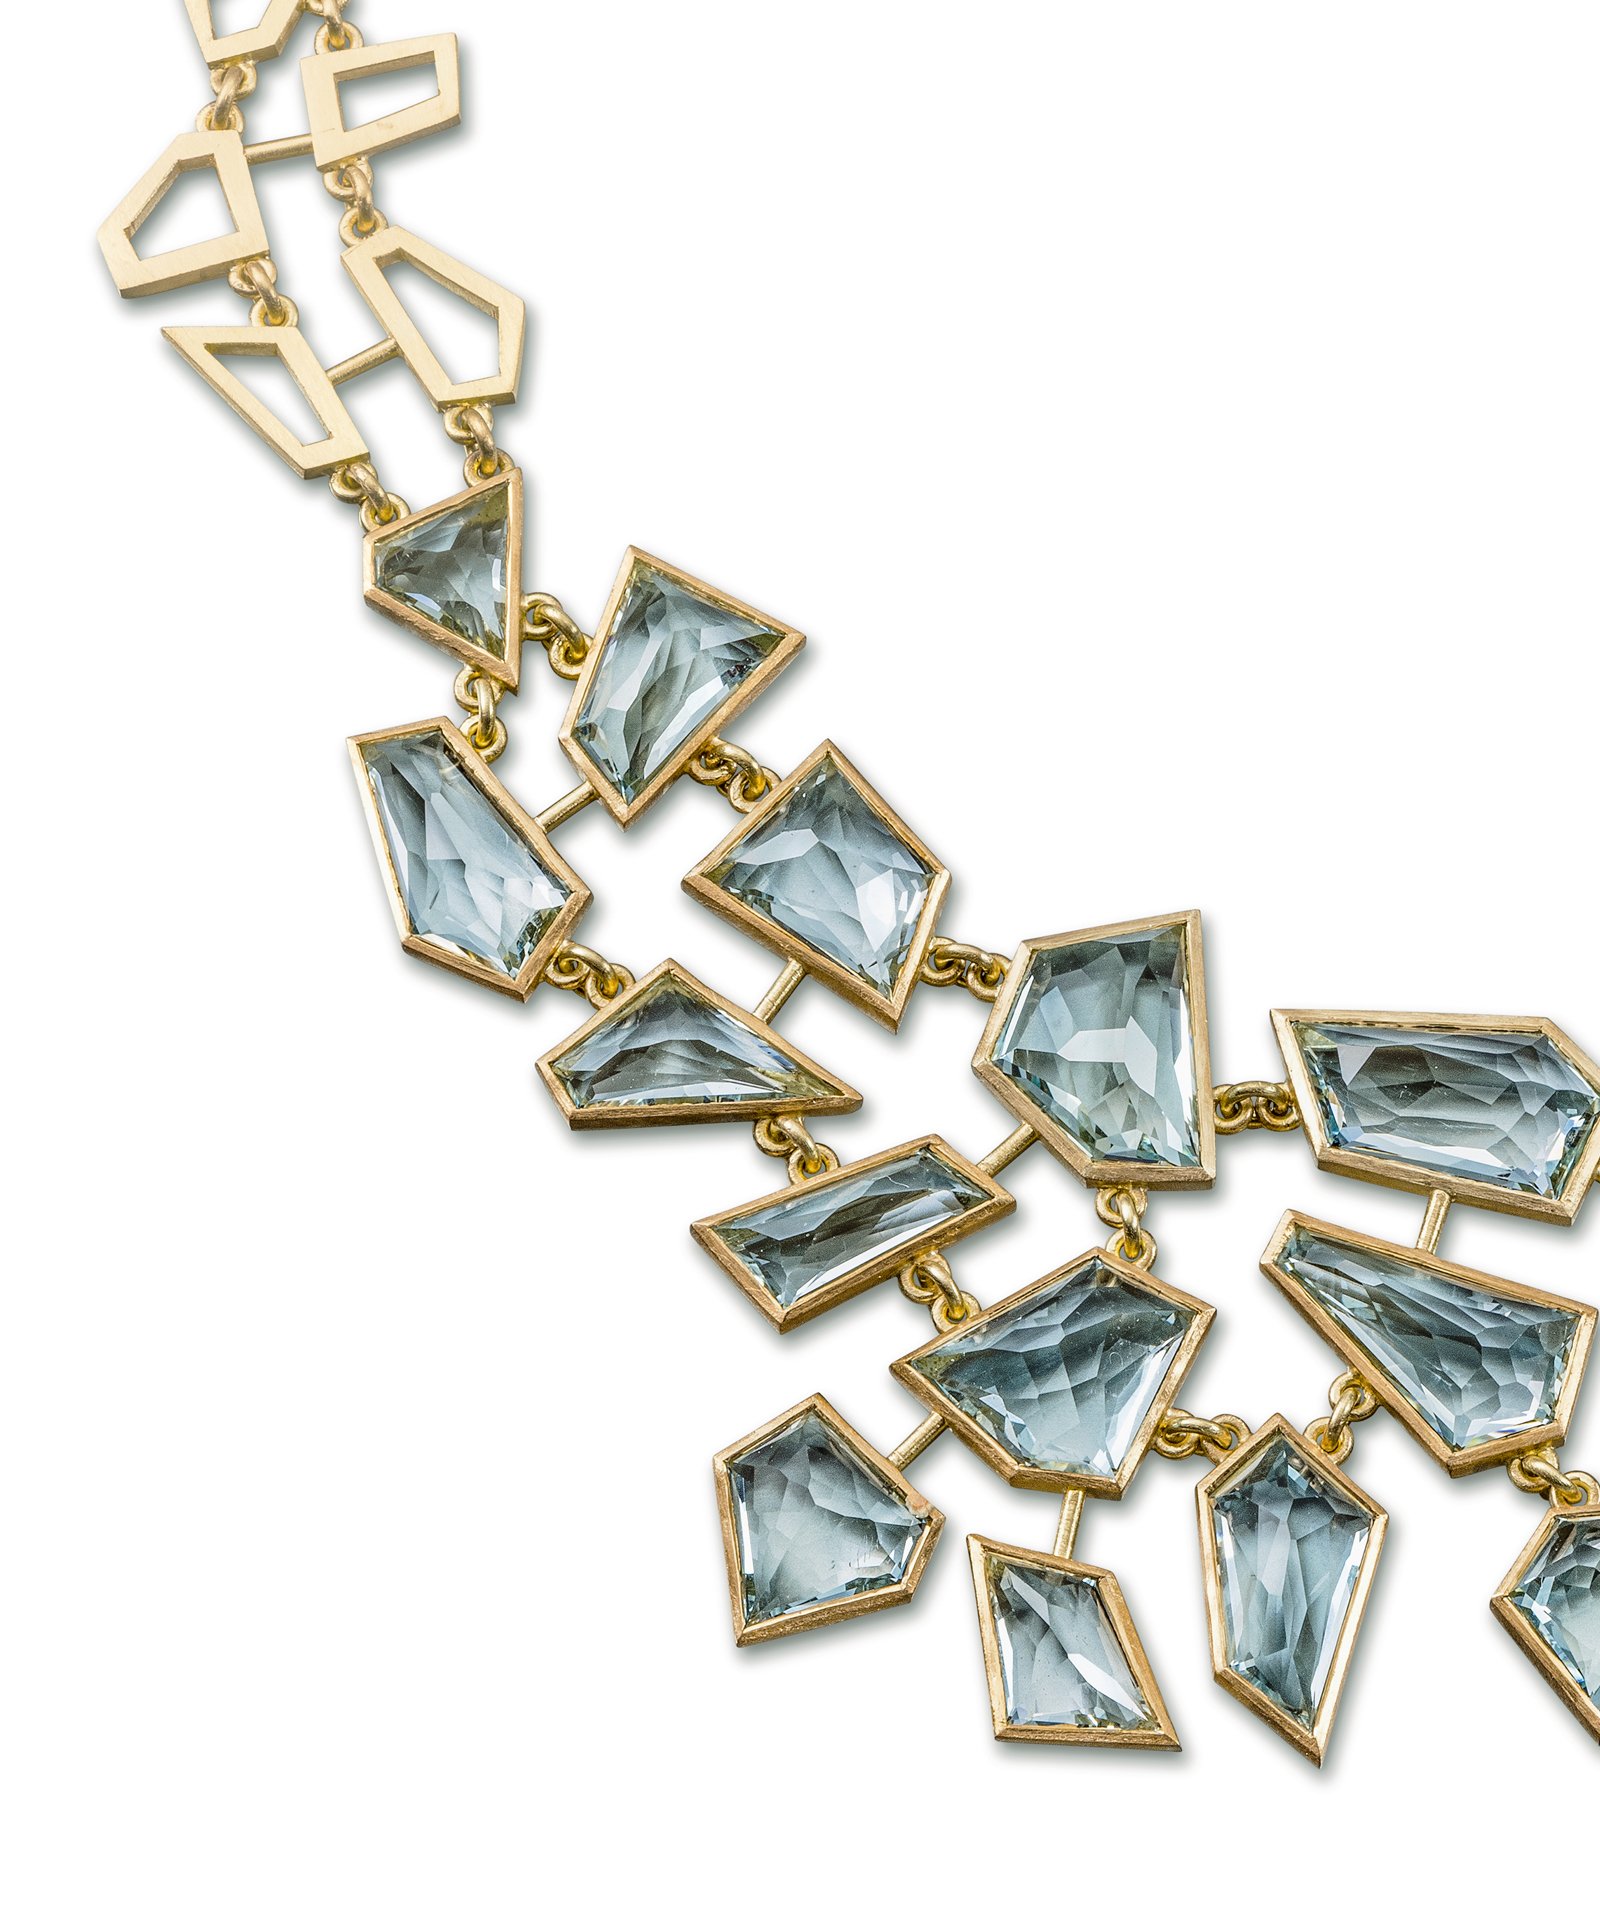 Freeform Aquamarine necklace 18ct 22ct gold one-of-a-kind luxury cocktail necklace goldsmith handmade